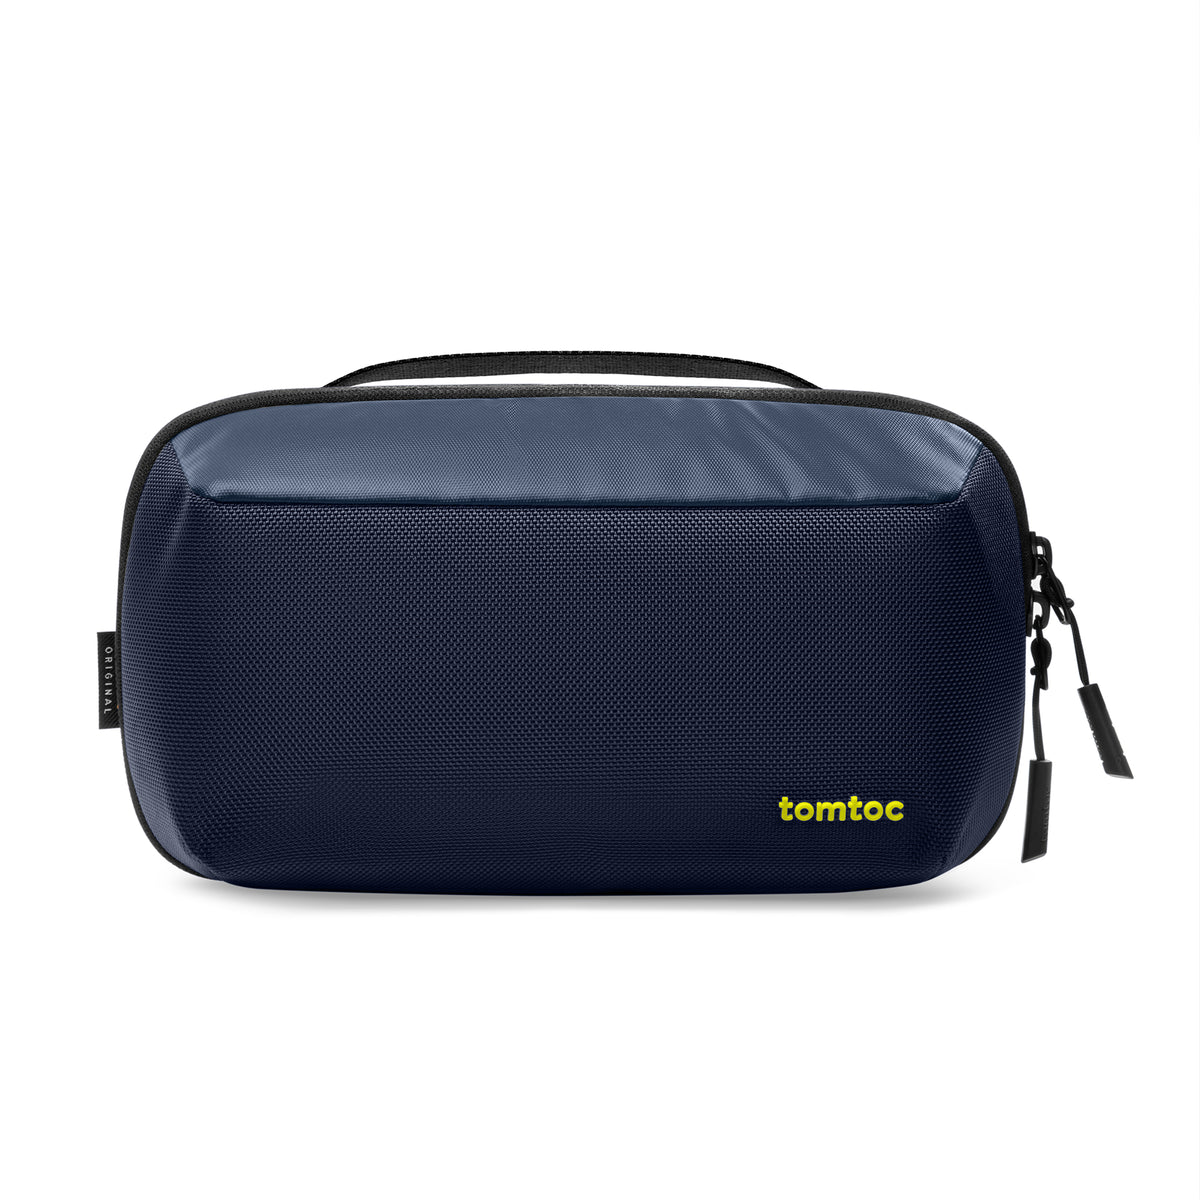 tomtoc Accessories Tech Pouch Water-Resistant Storage Bag